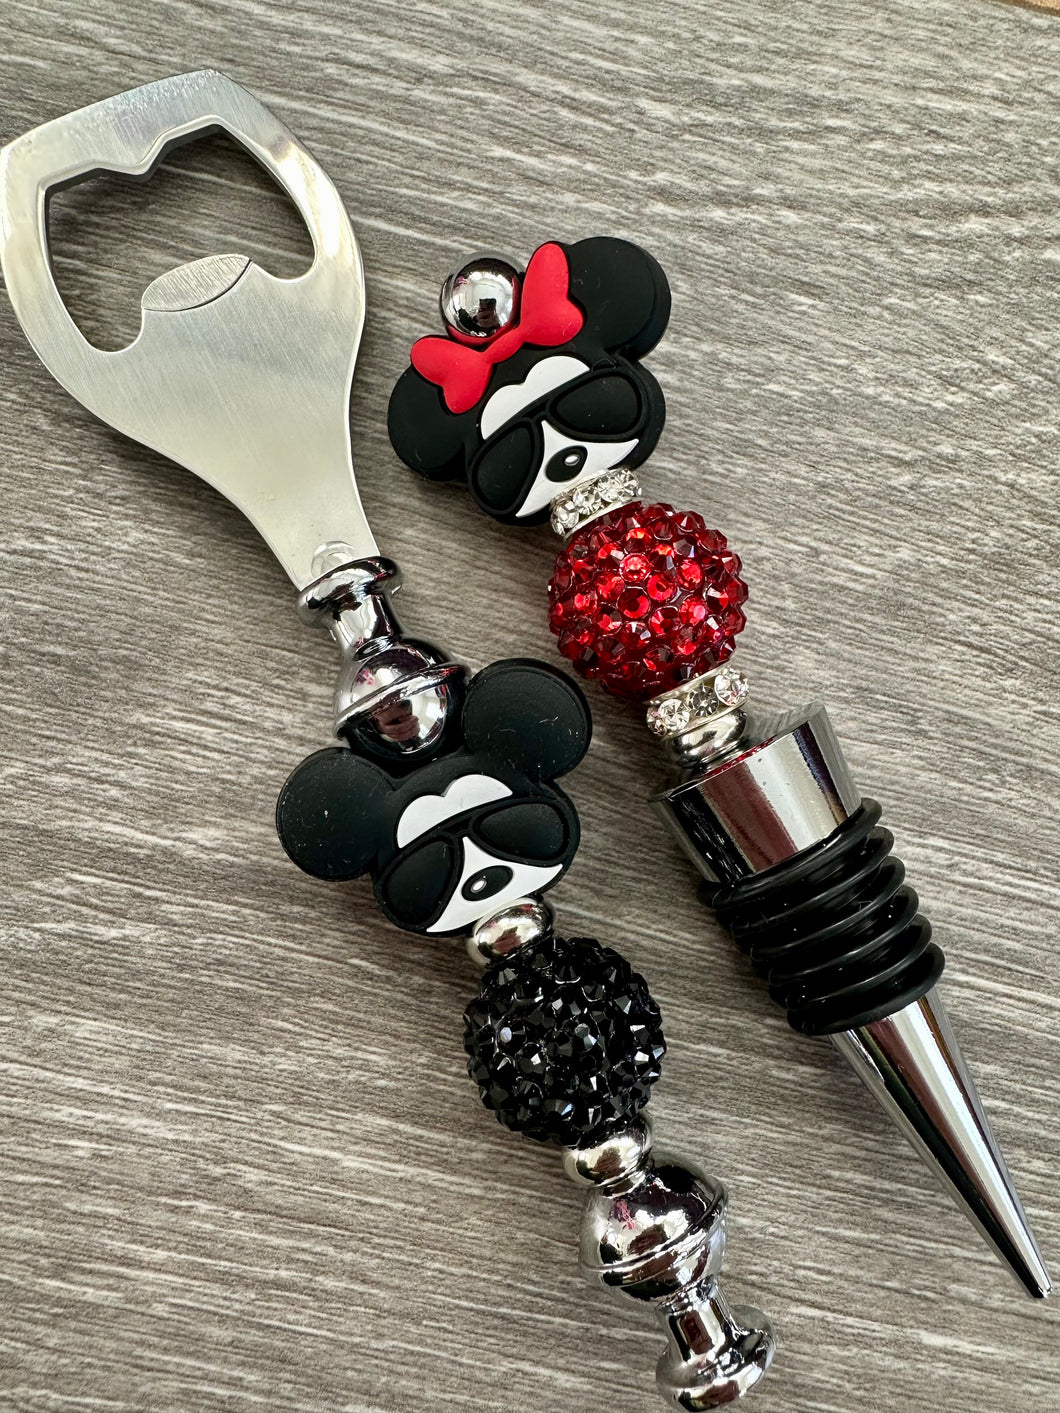 This is Love- Mickey & Minnie set